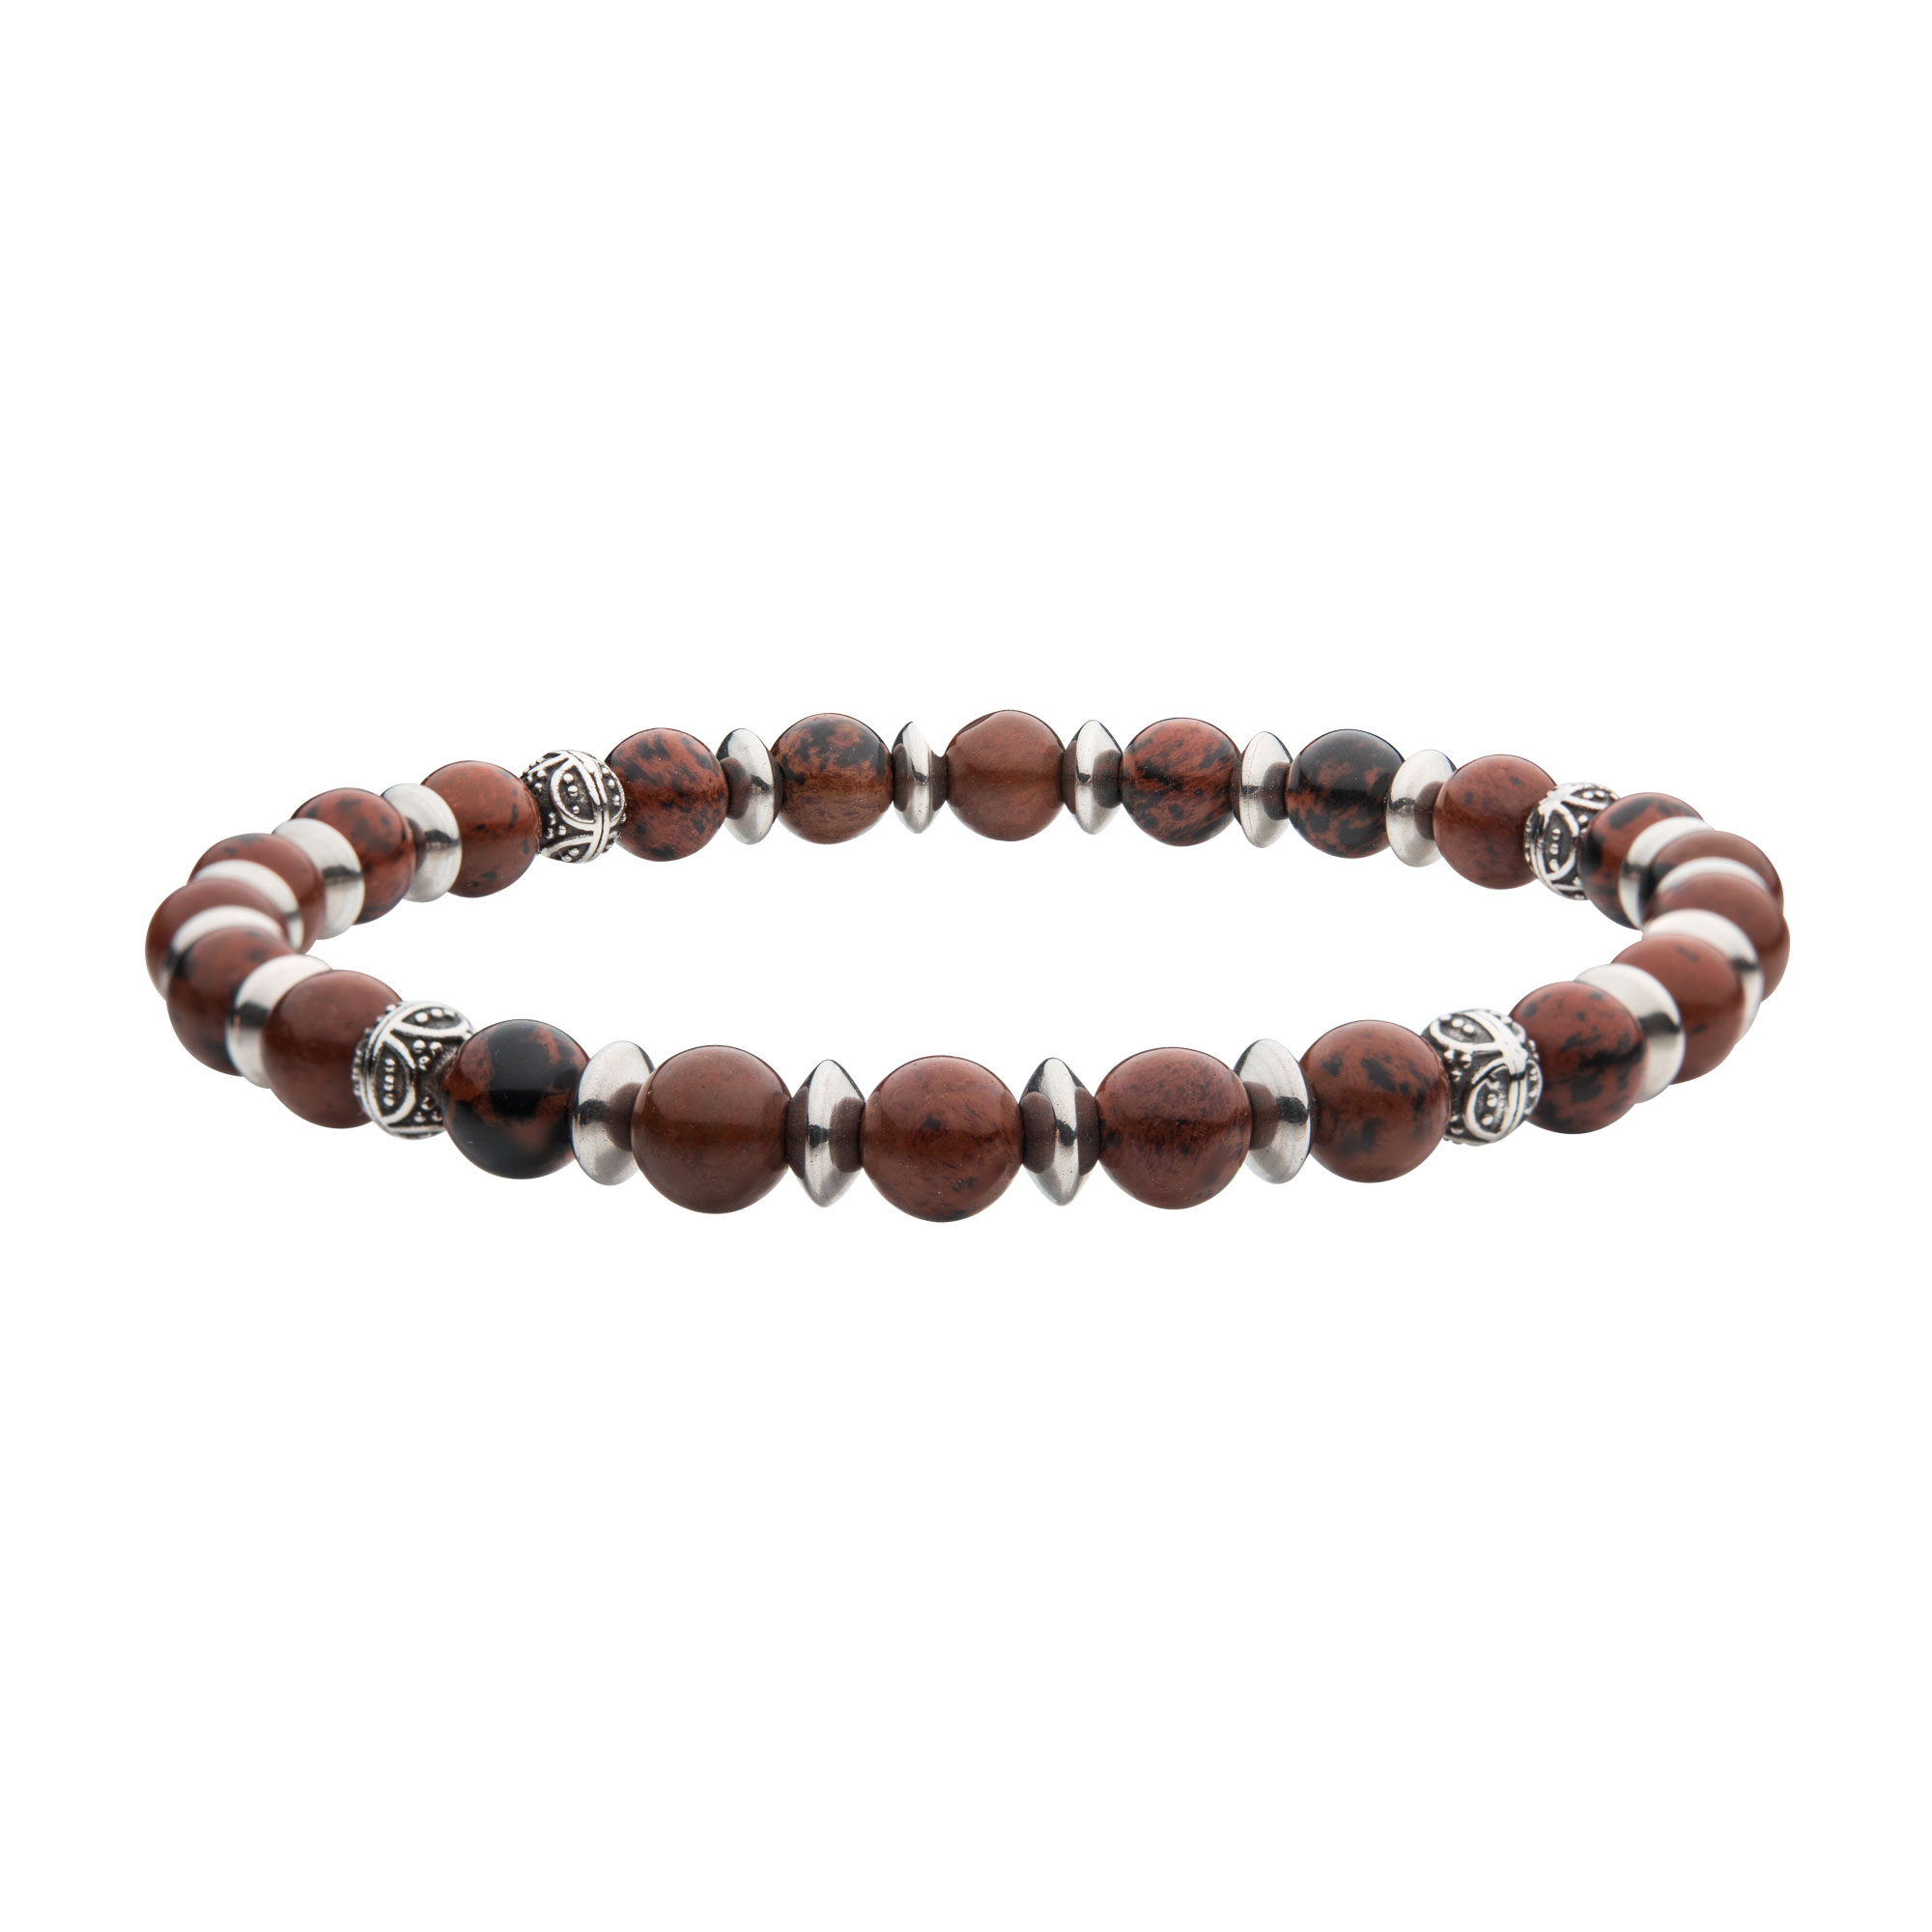 Brown Obsidian Stones with Black Oxidized Beads Bracelet Ritzi Jewelers Brookville, IN